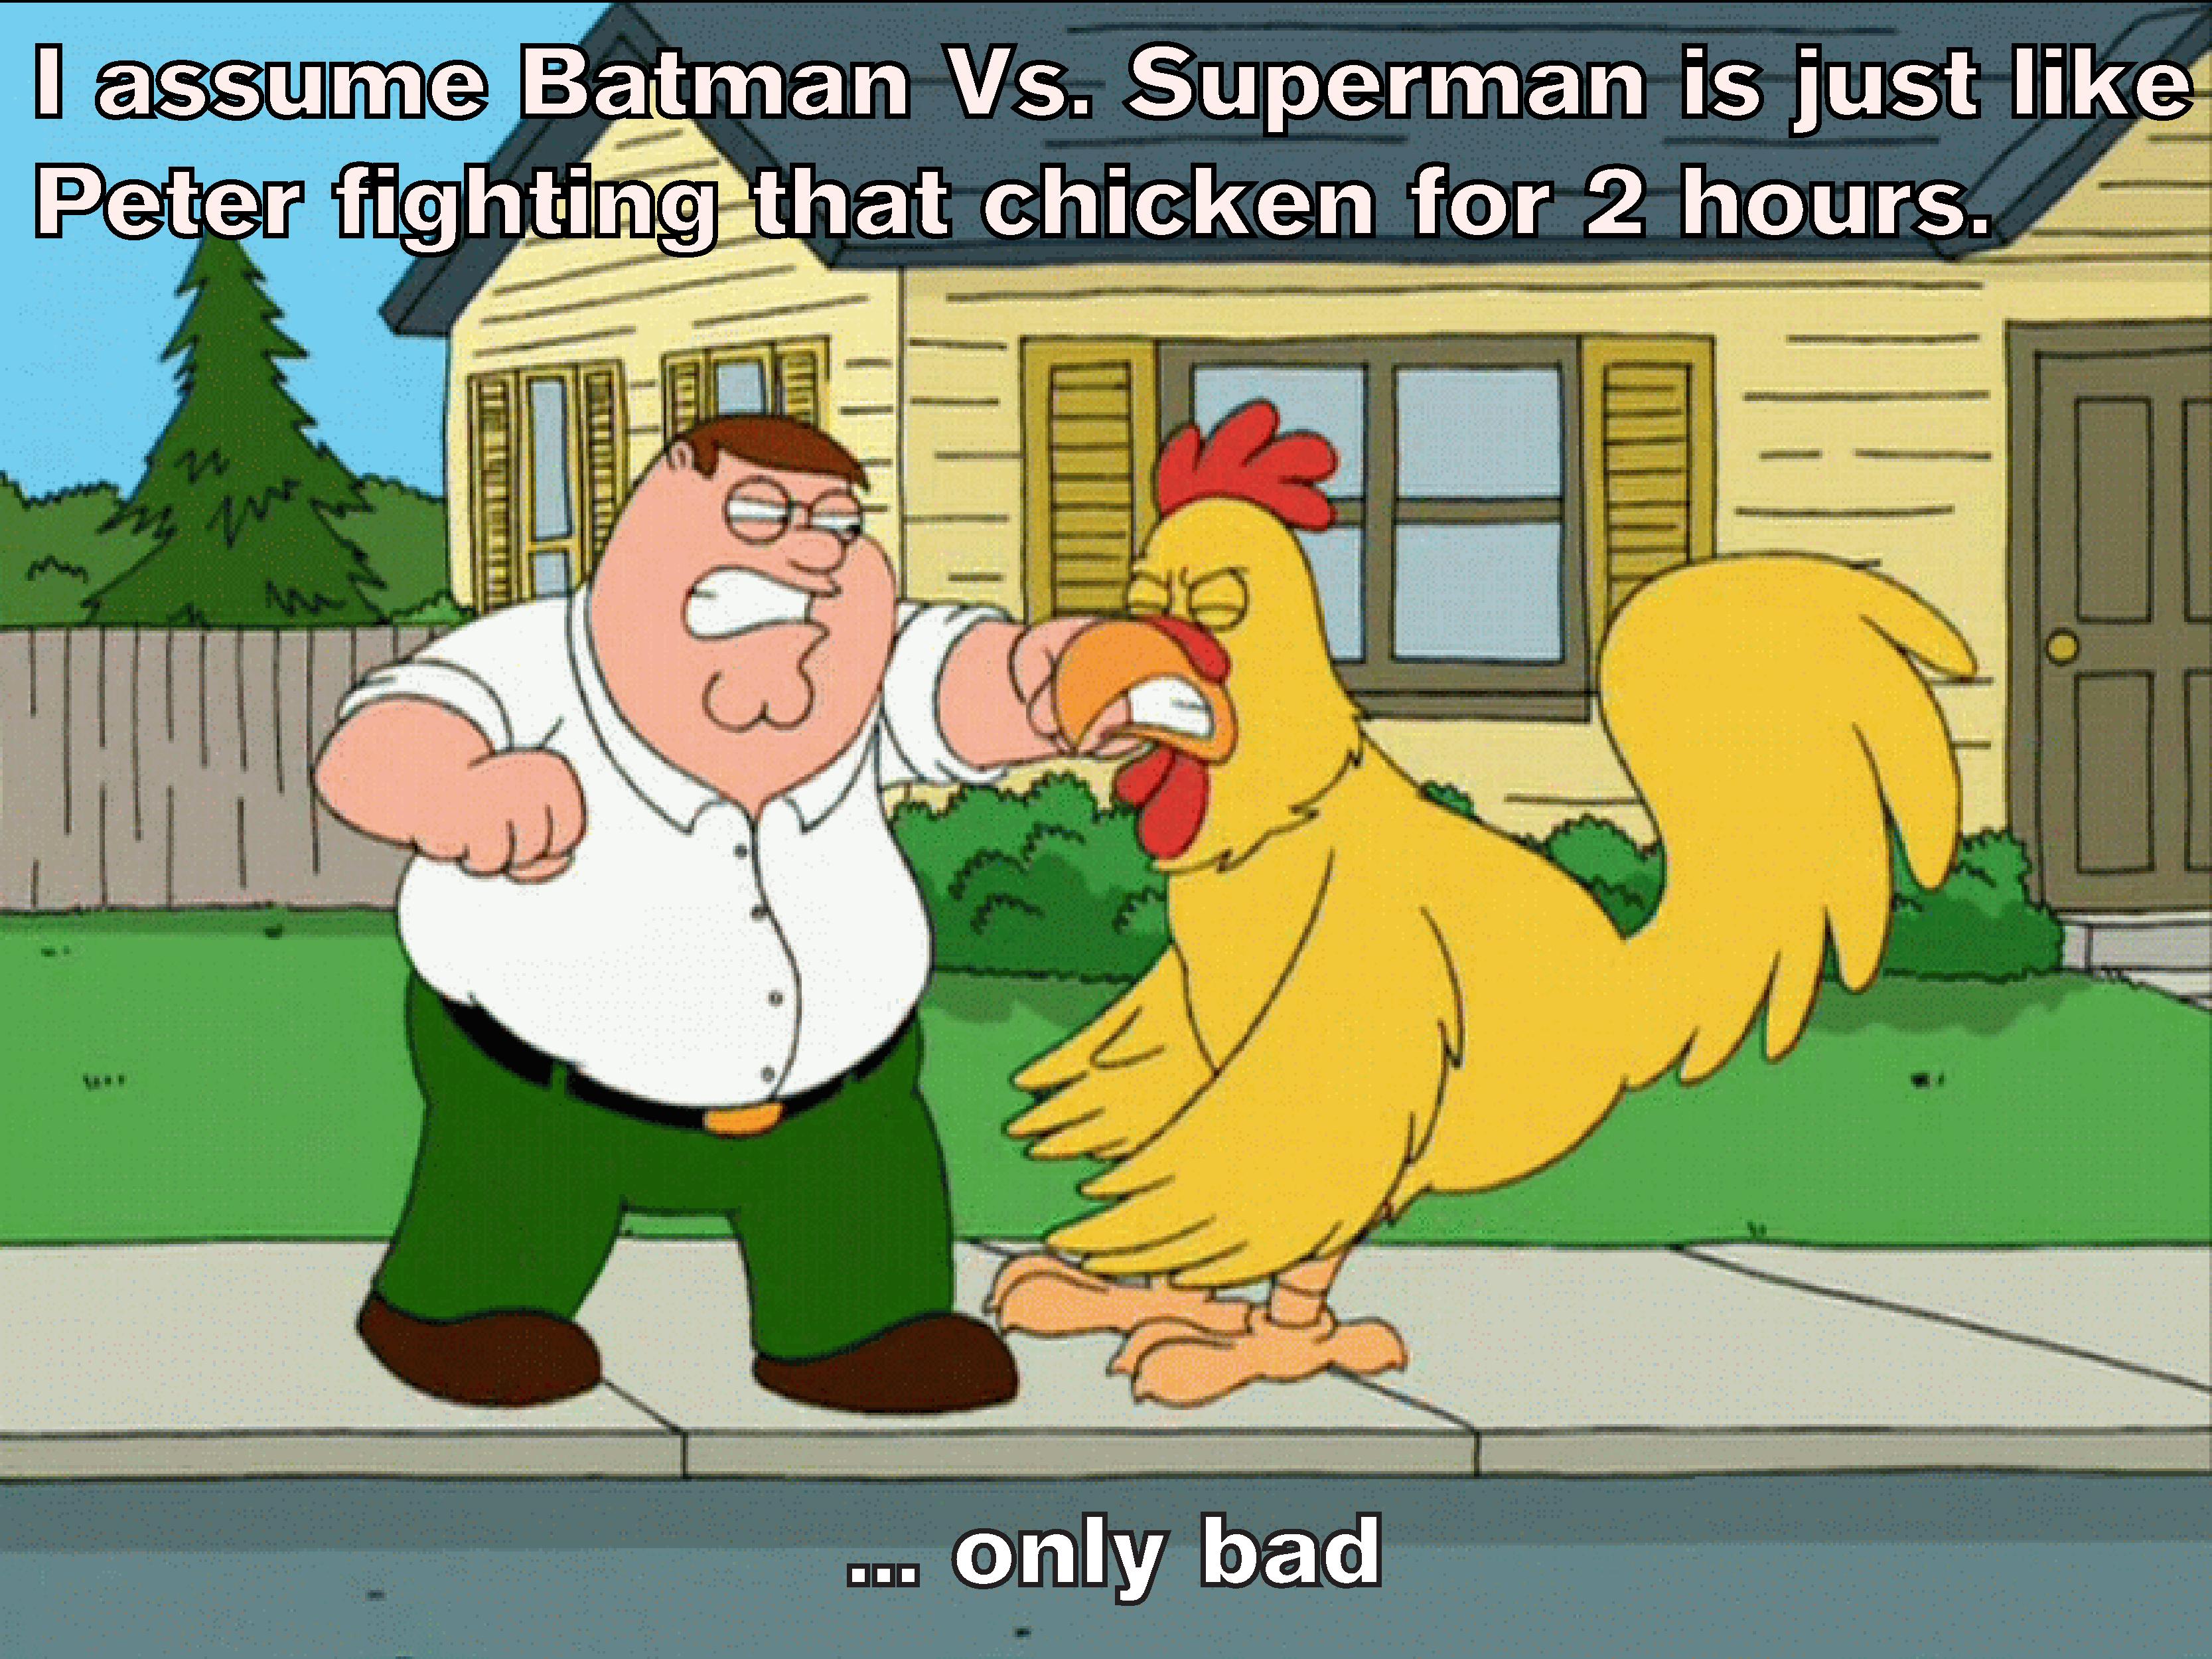 family guy chicken fight - I assume Batman Vs. Superman is just Peter fighting that chicken for 2 hours. ... only bad